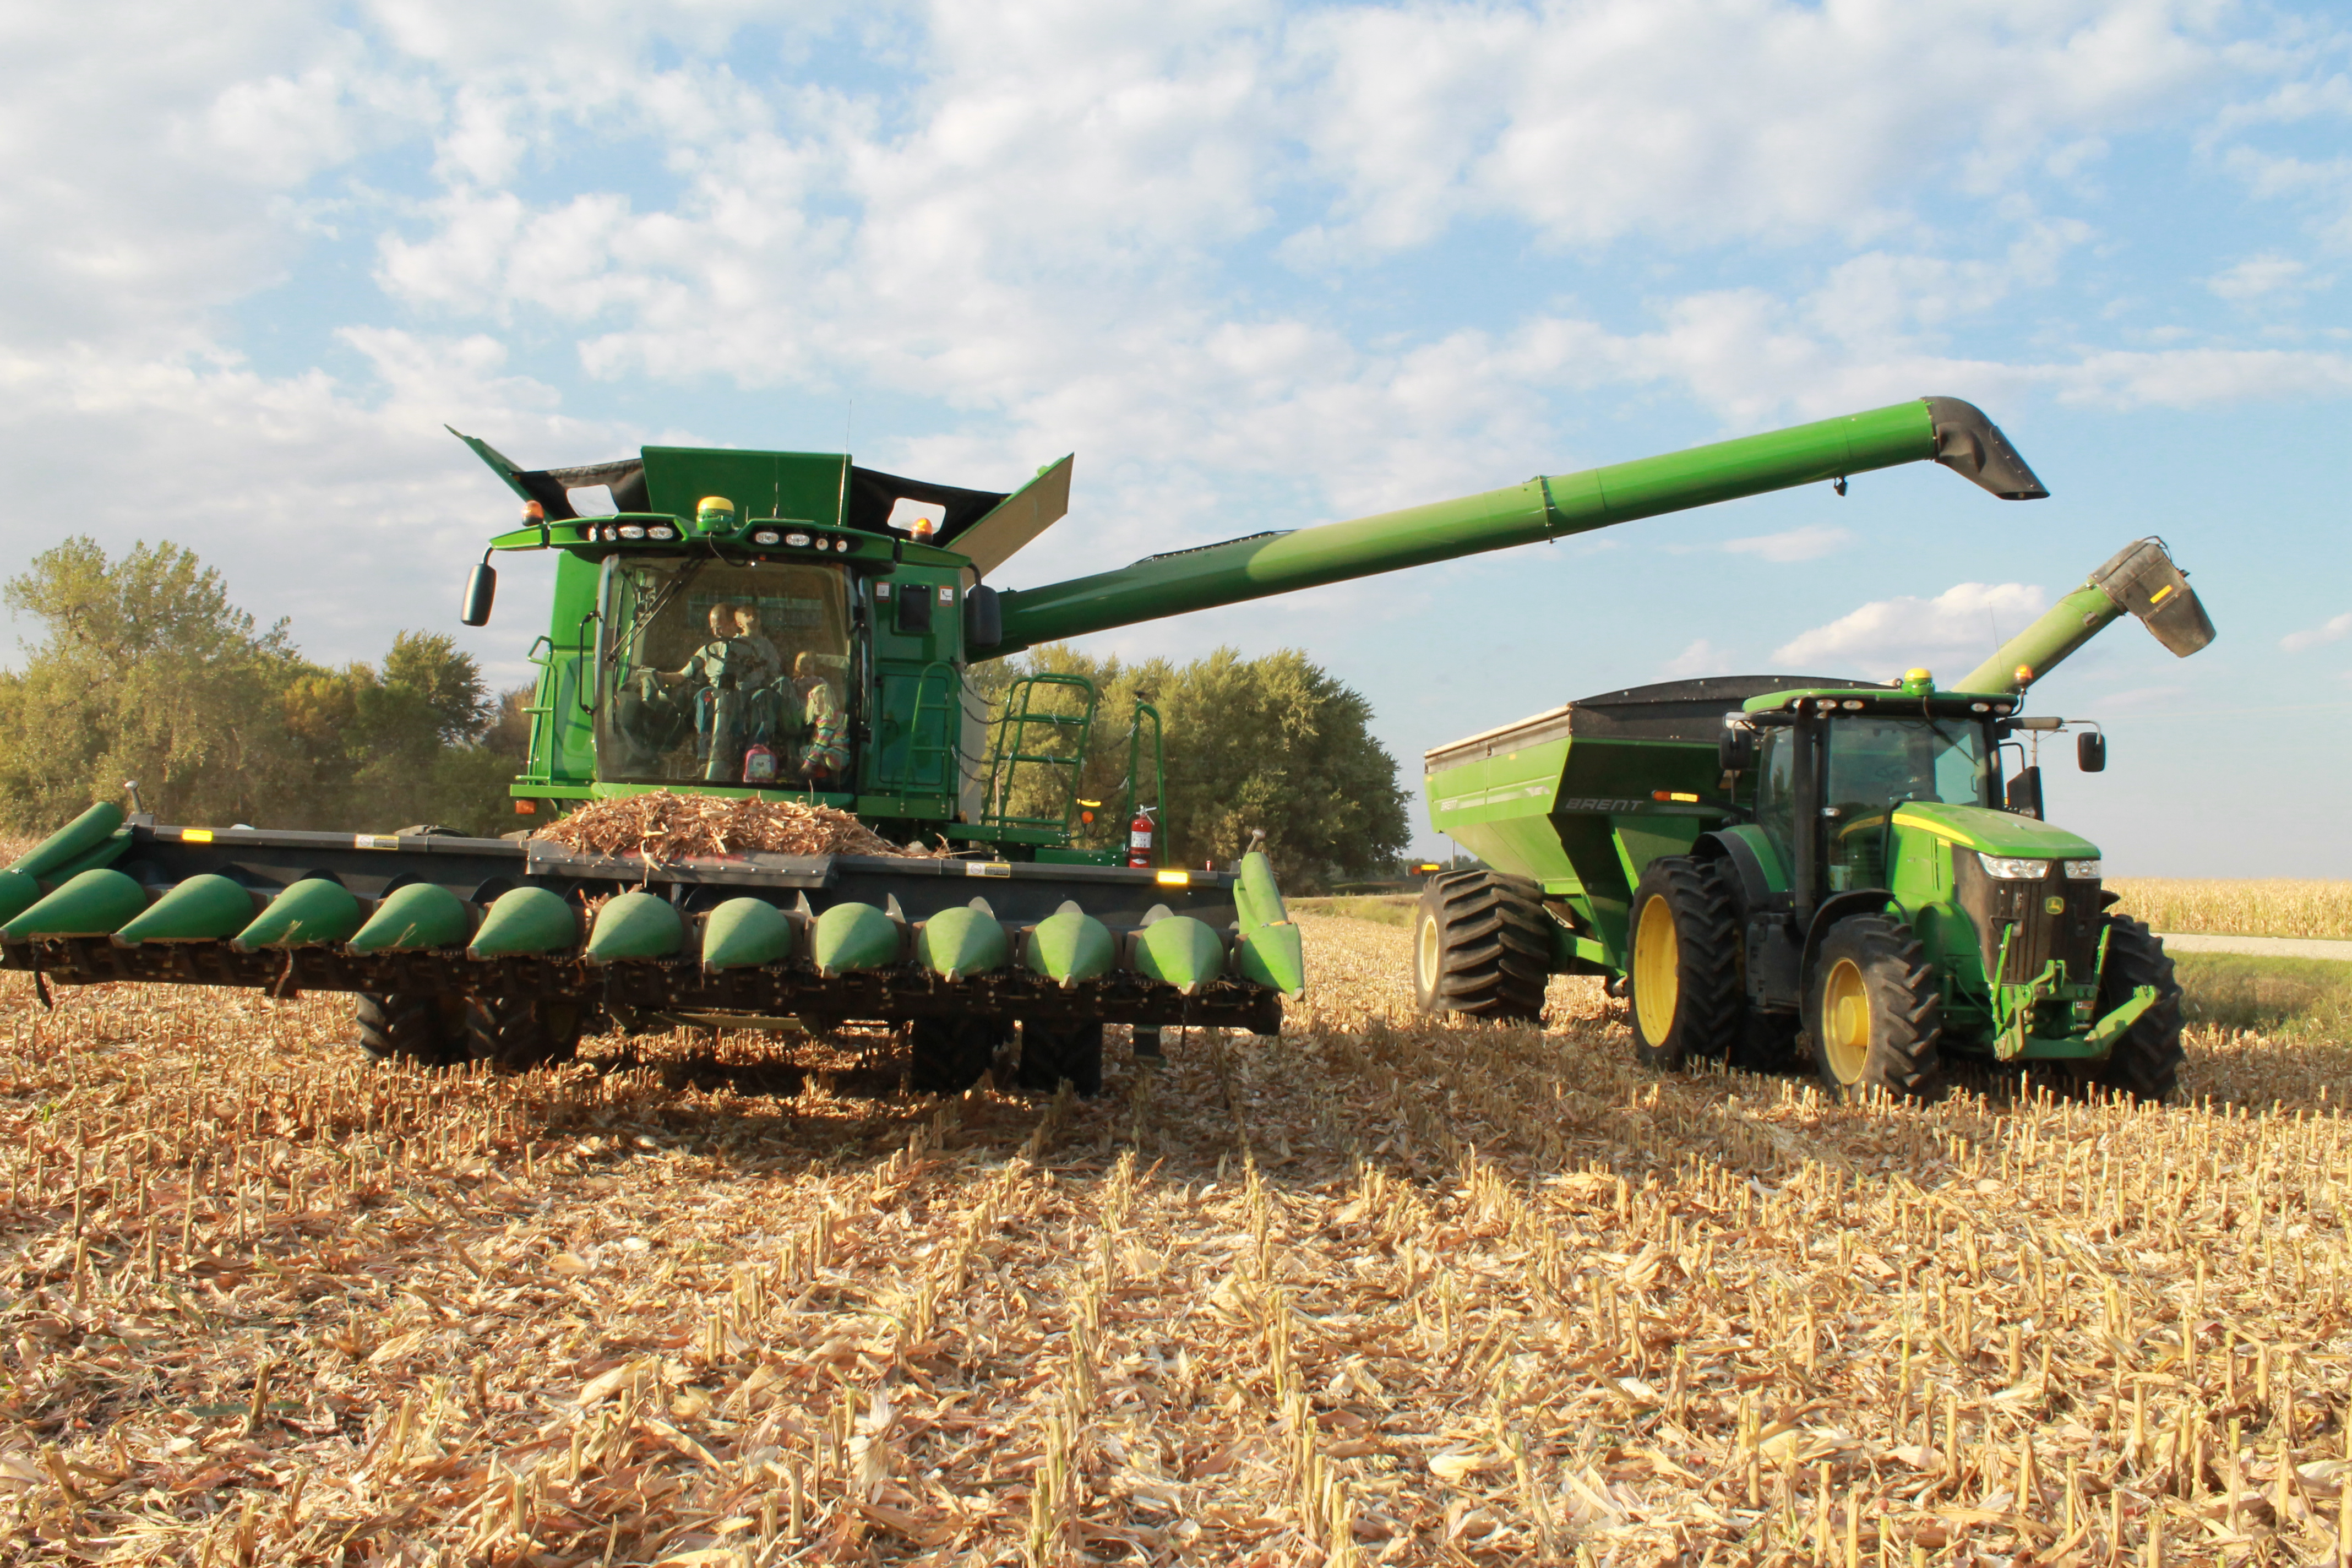 Ever Wonder How A Corn Combine Works? This Video Will Show You How!